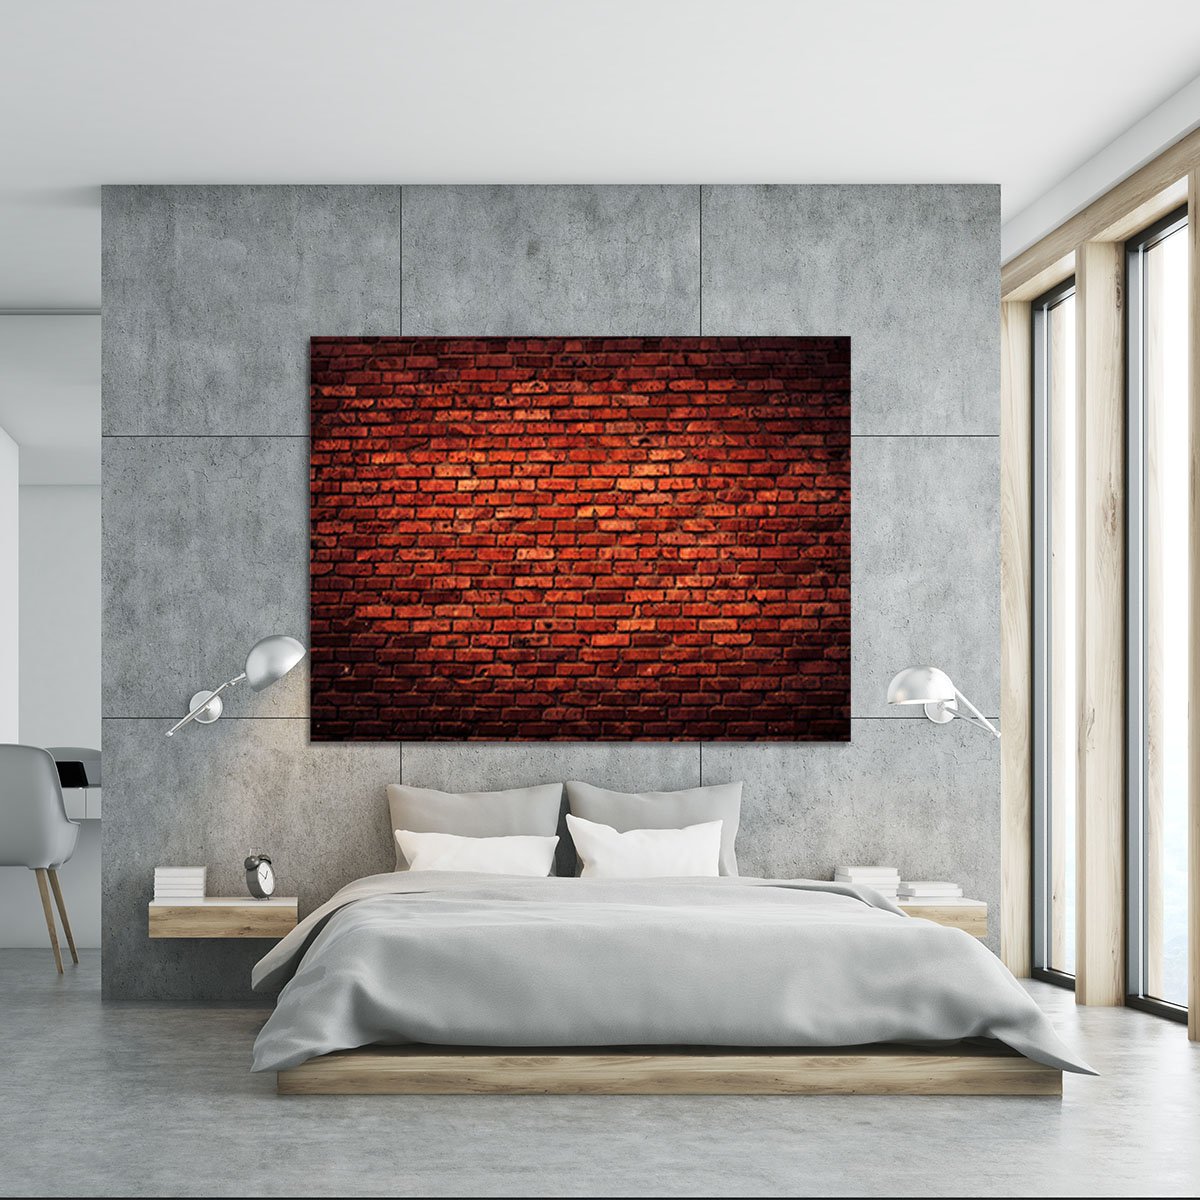 Old grunge brick Canvas Print or Poster